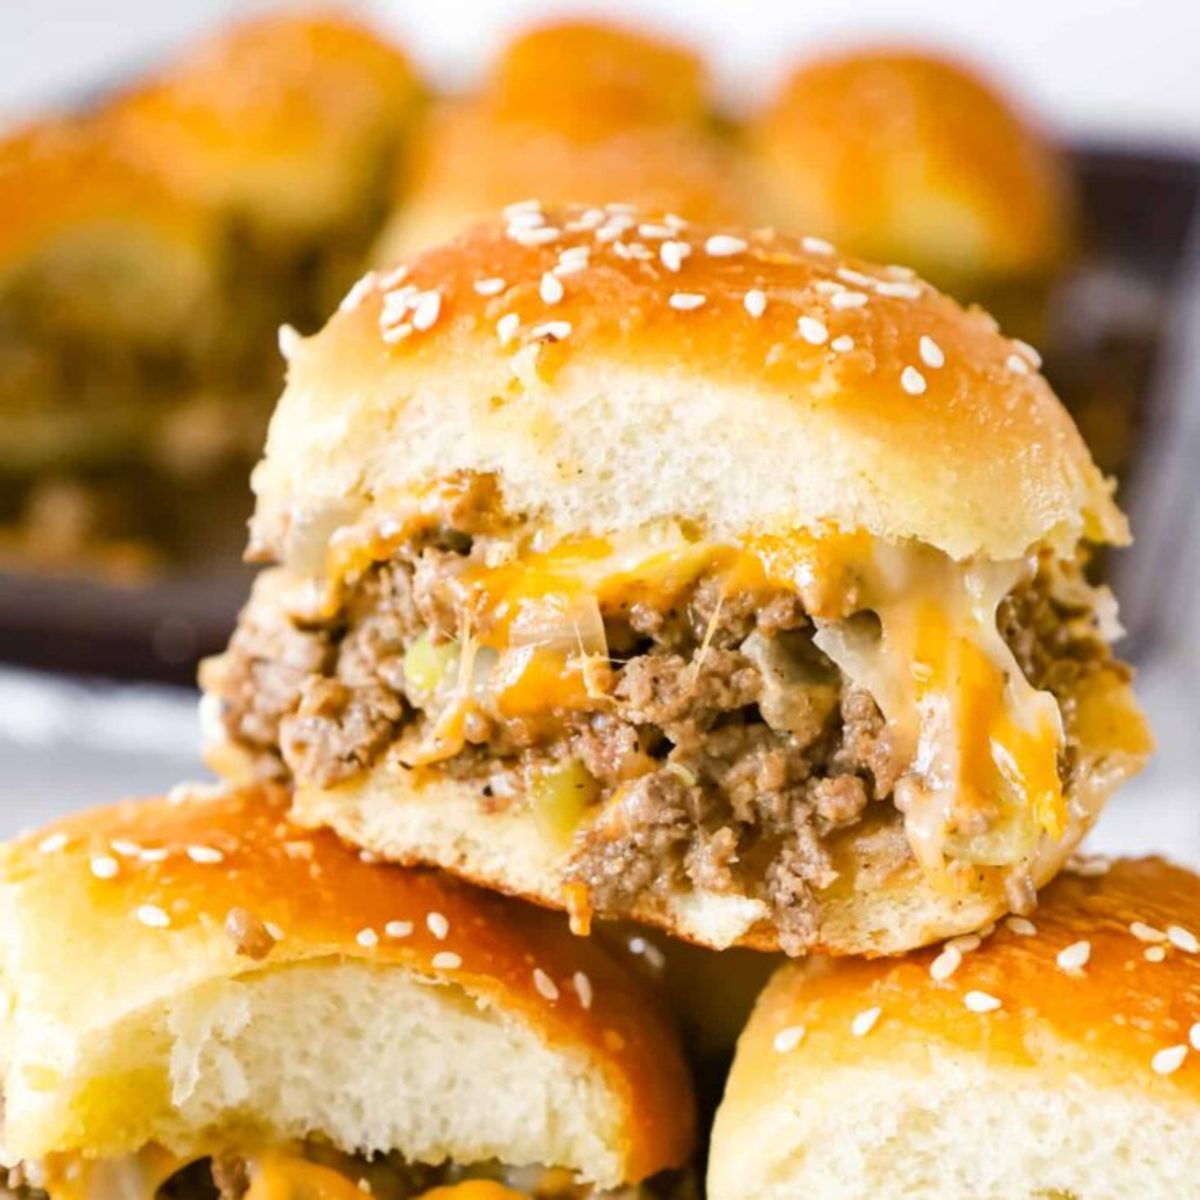 my grandkids came to visit me and they went crazy about these little turkey sliders and they did not know it was ground turkey they thought it was ground beef and it really healthy.